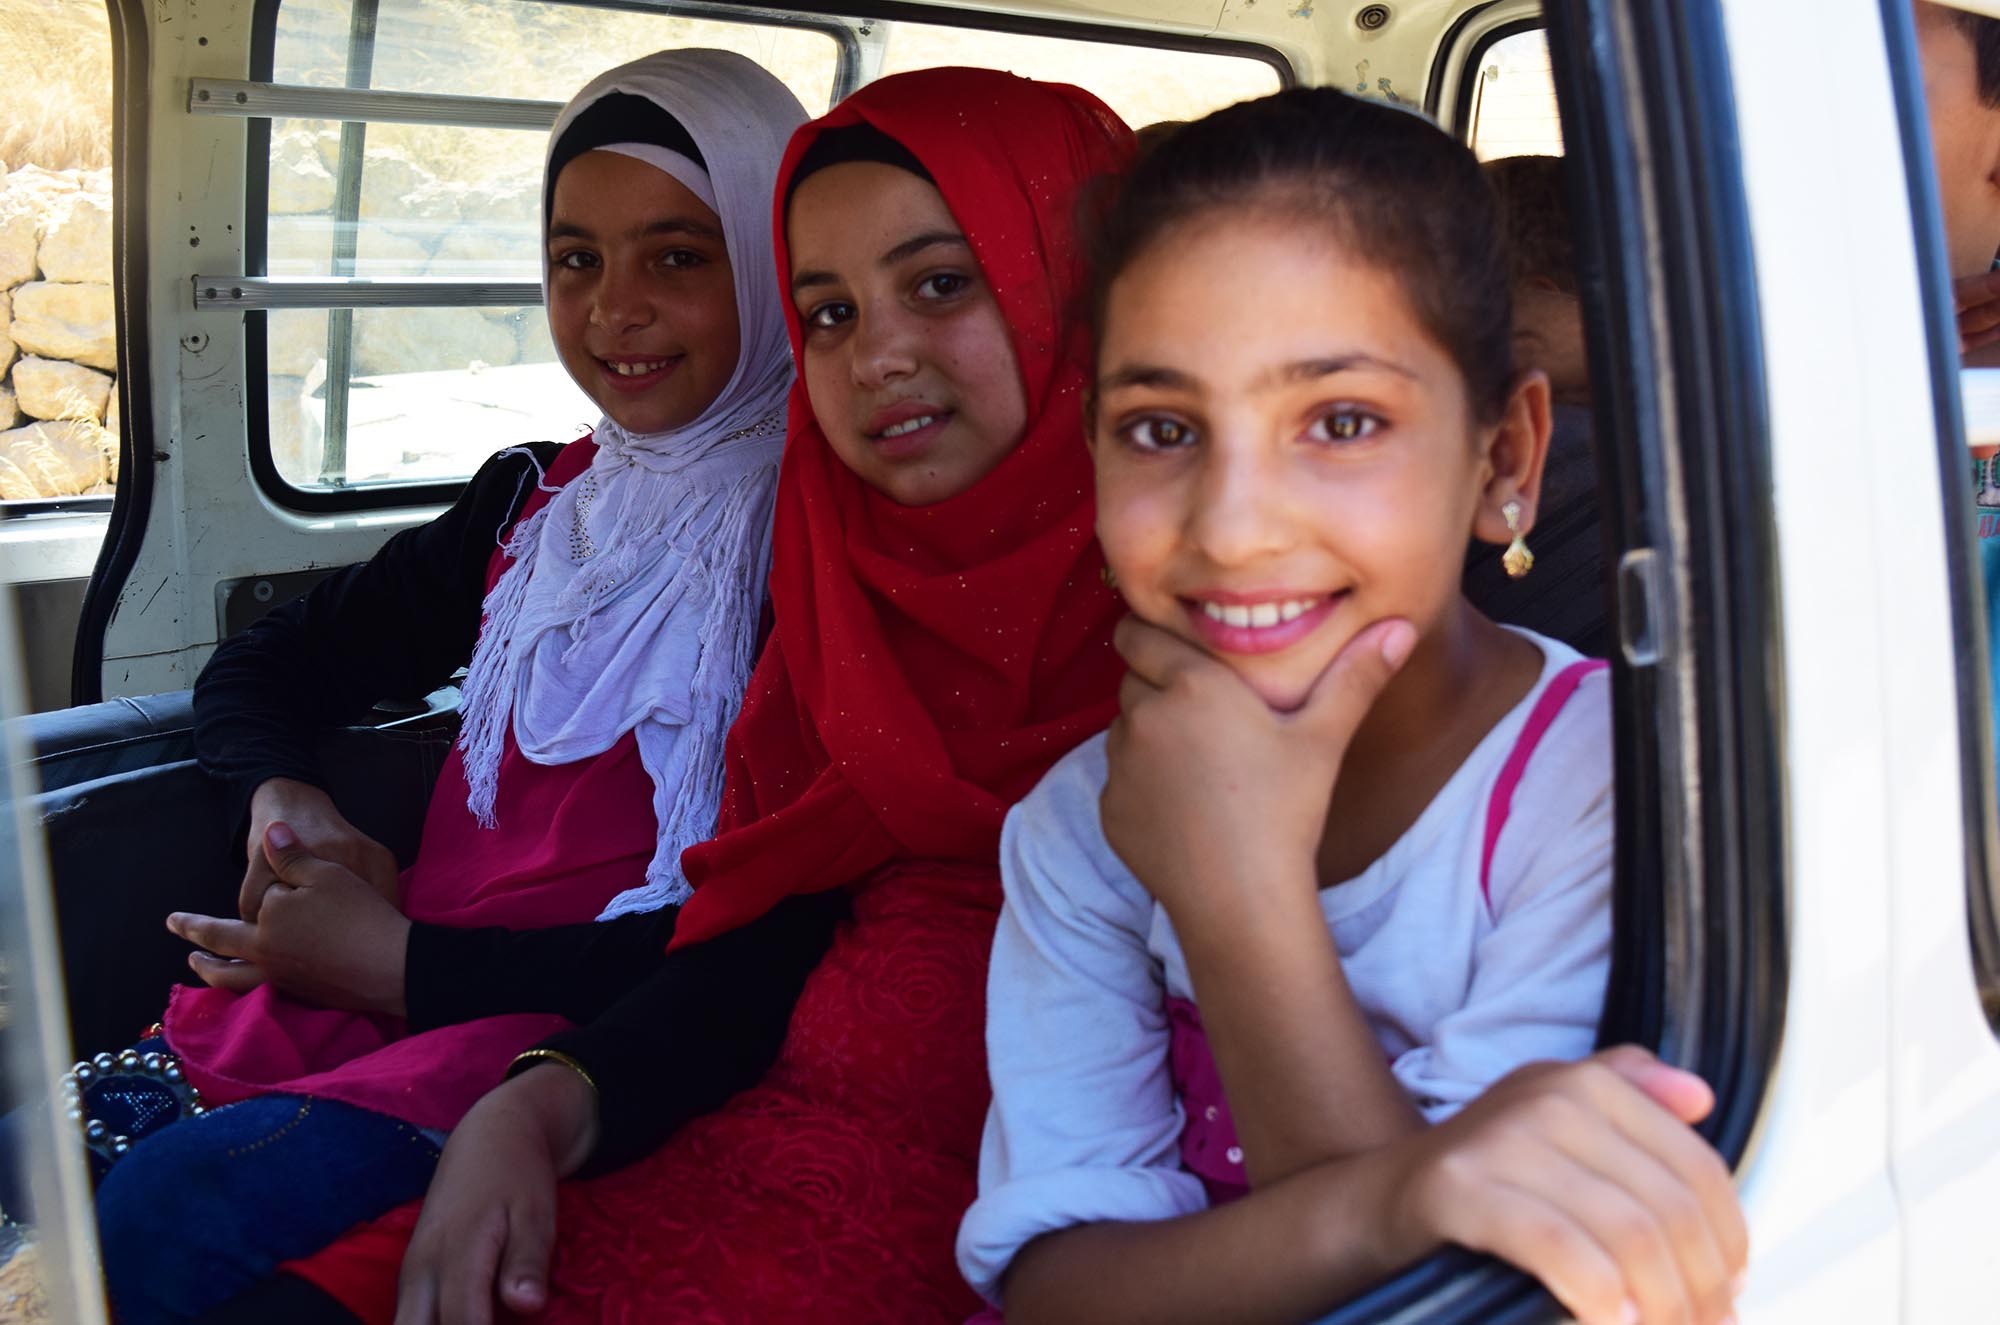 Dalaa, Shahed, and other Syrian refugee children from their camp take a bus heading to the local health center where they will receive free dental care.